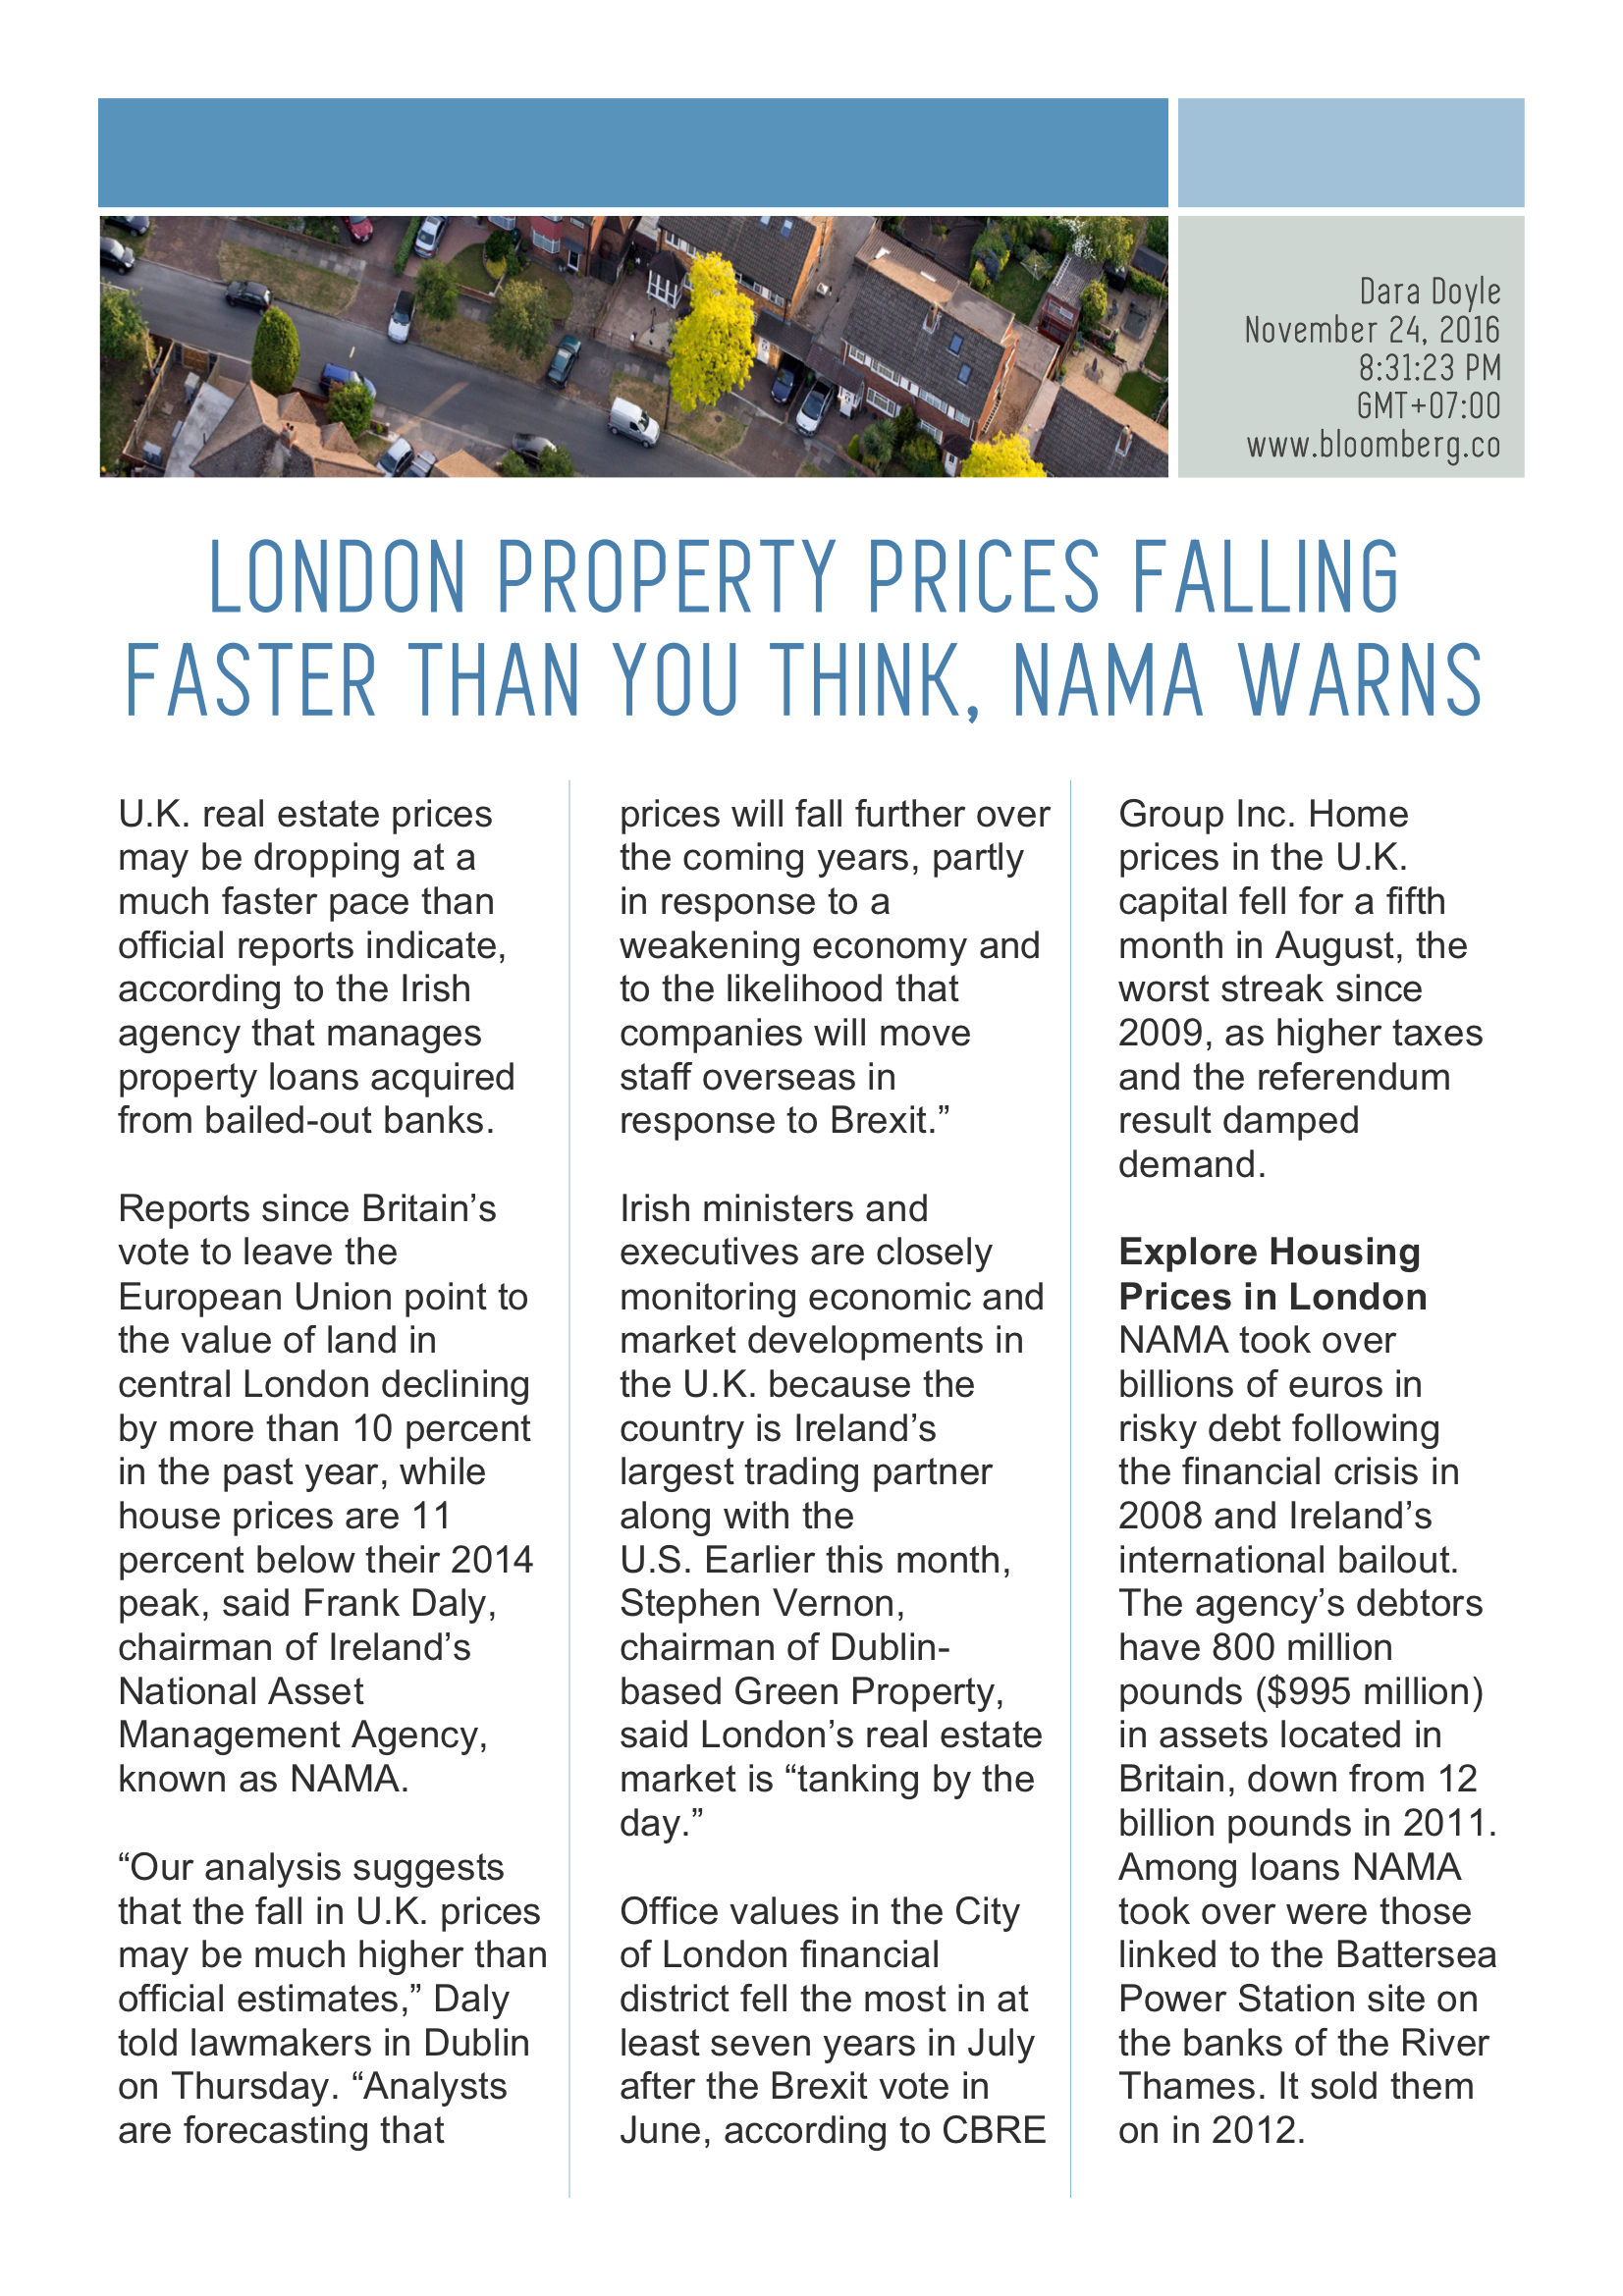 London Property Prices Falling Faster than You Think, NAMA Warns